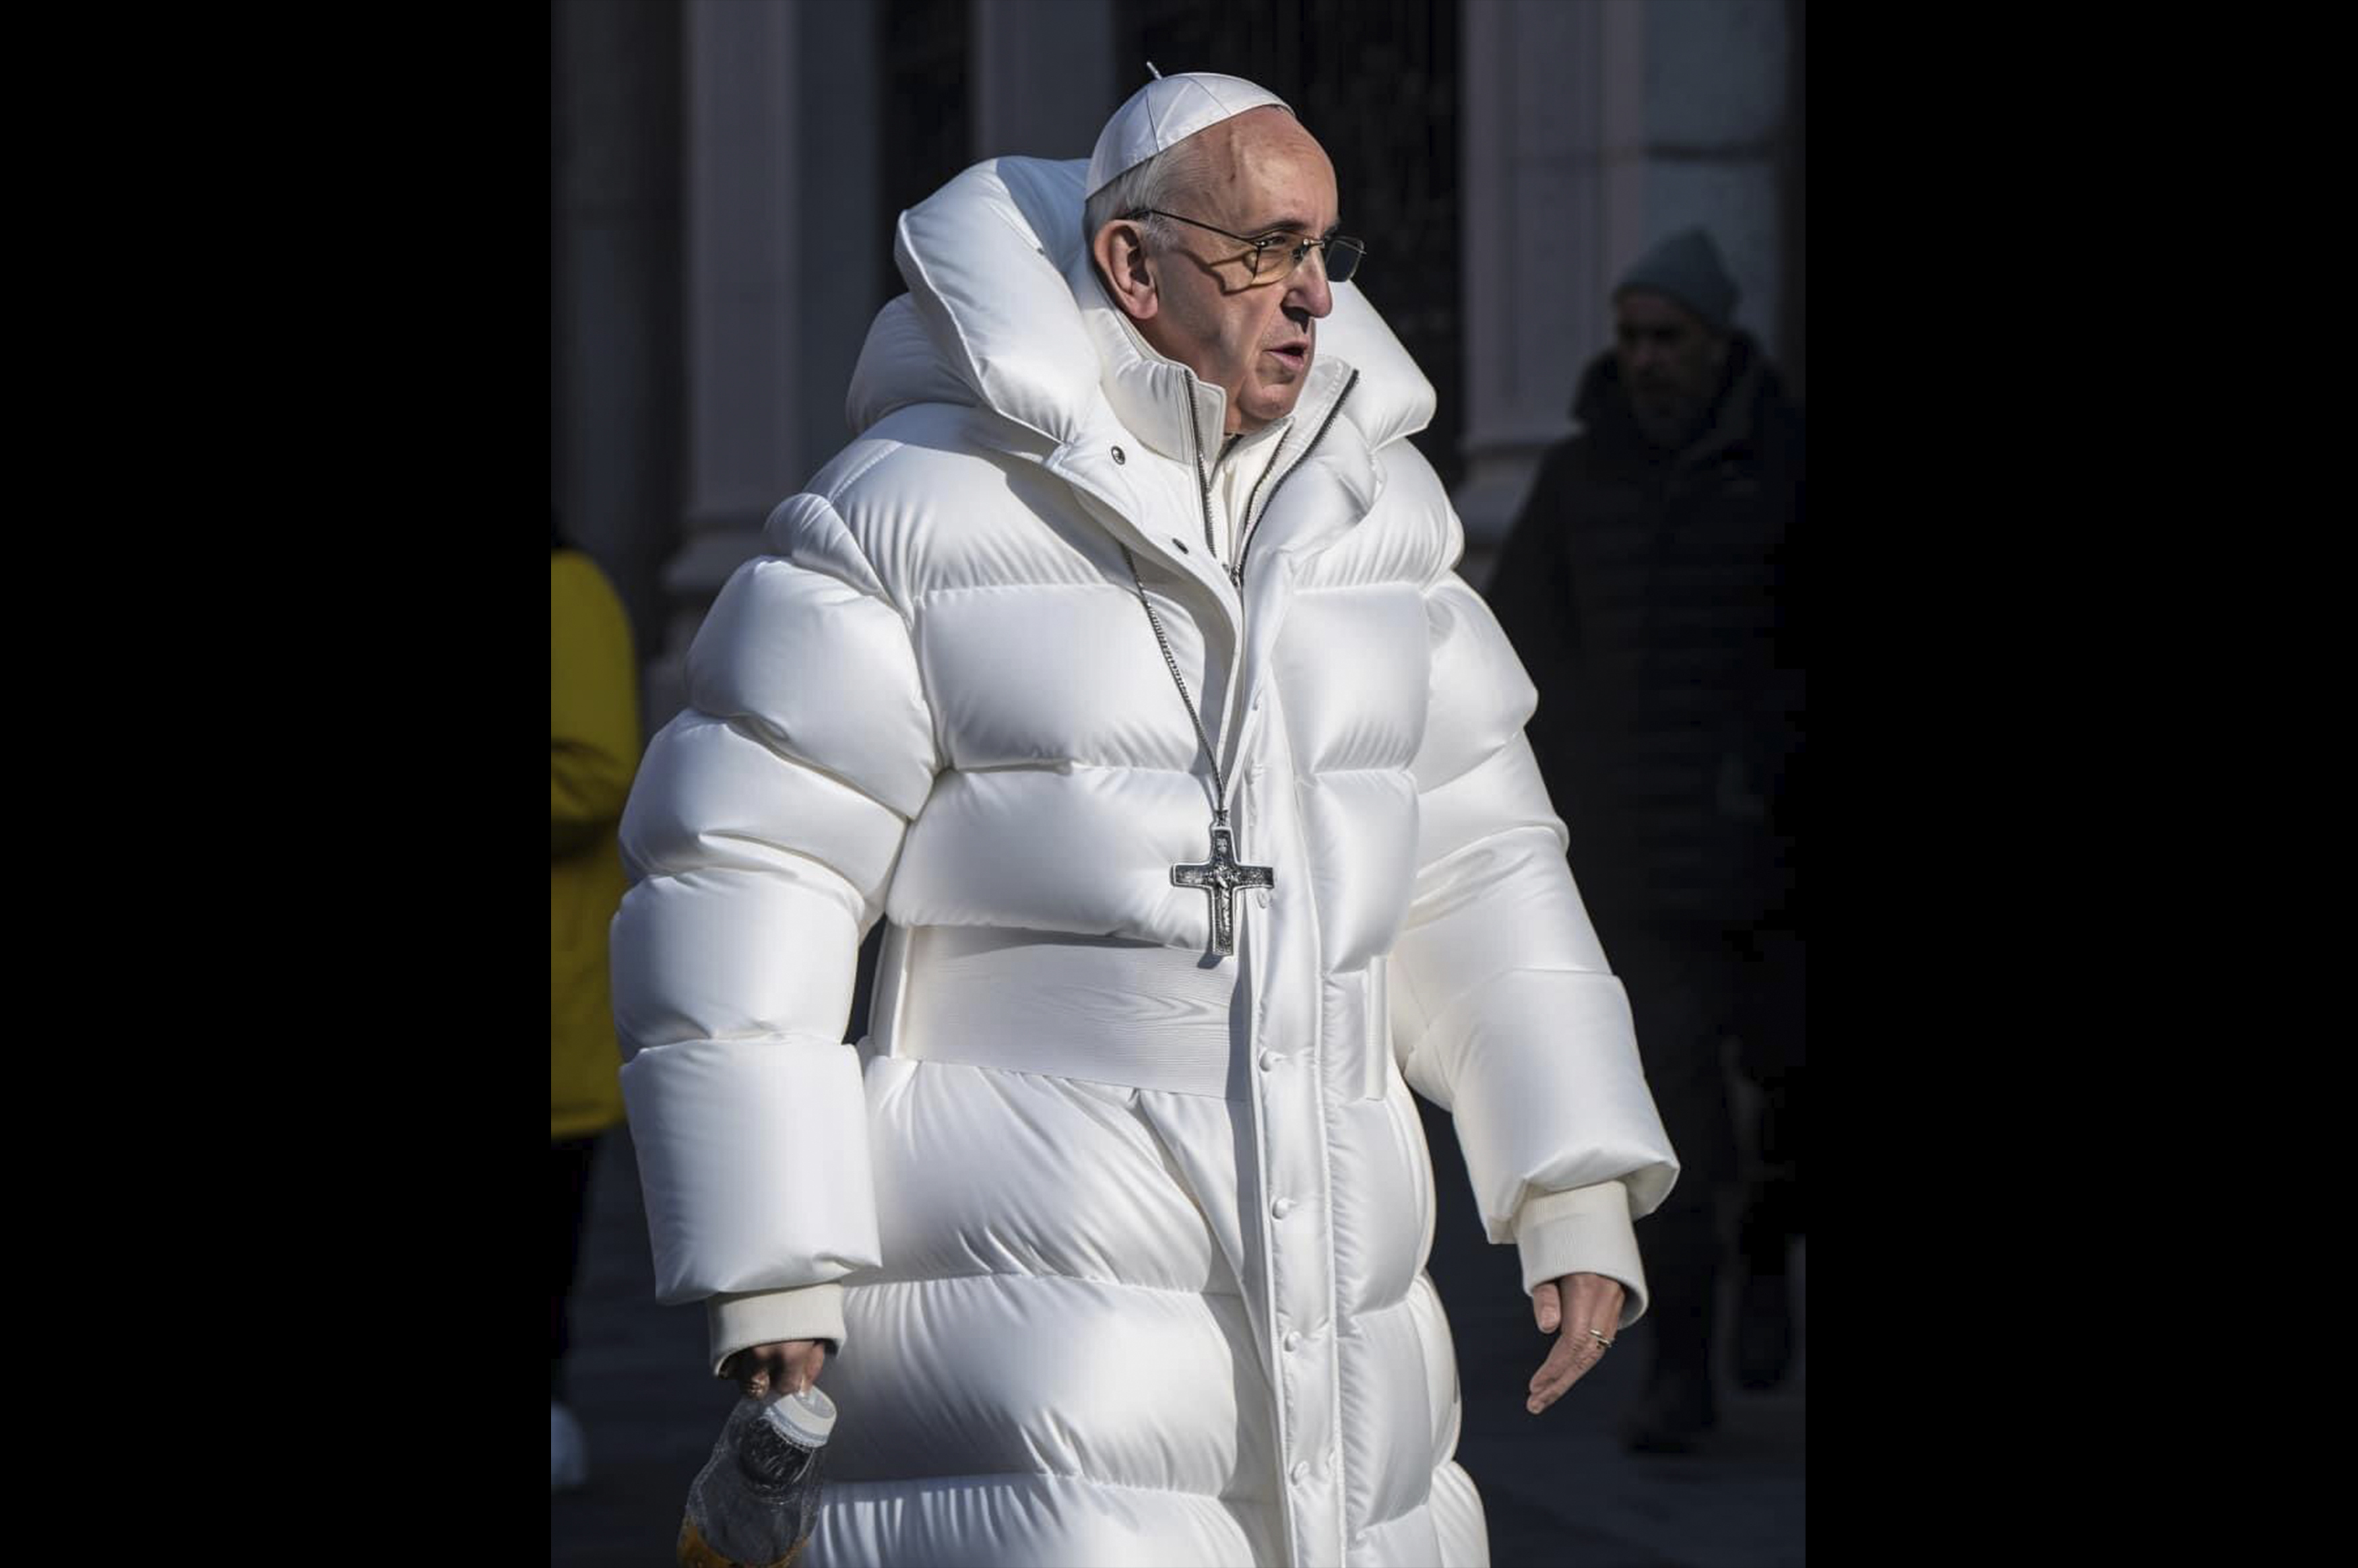 The pope in a coat AI image came from Midjourney What else is coming  from it